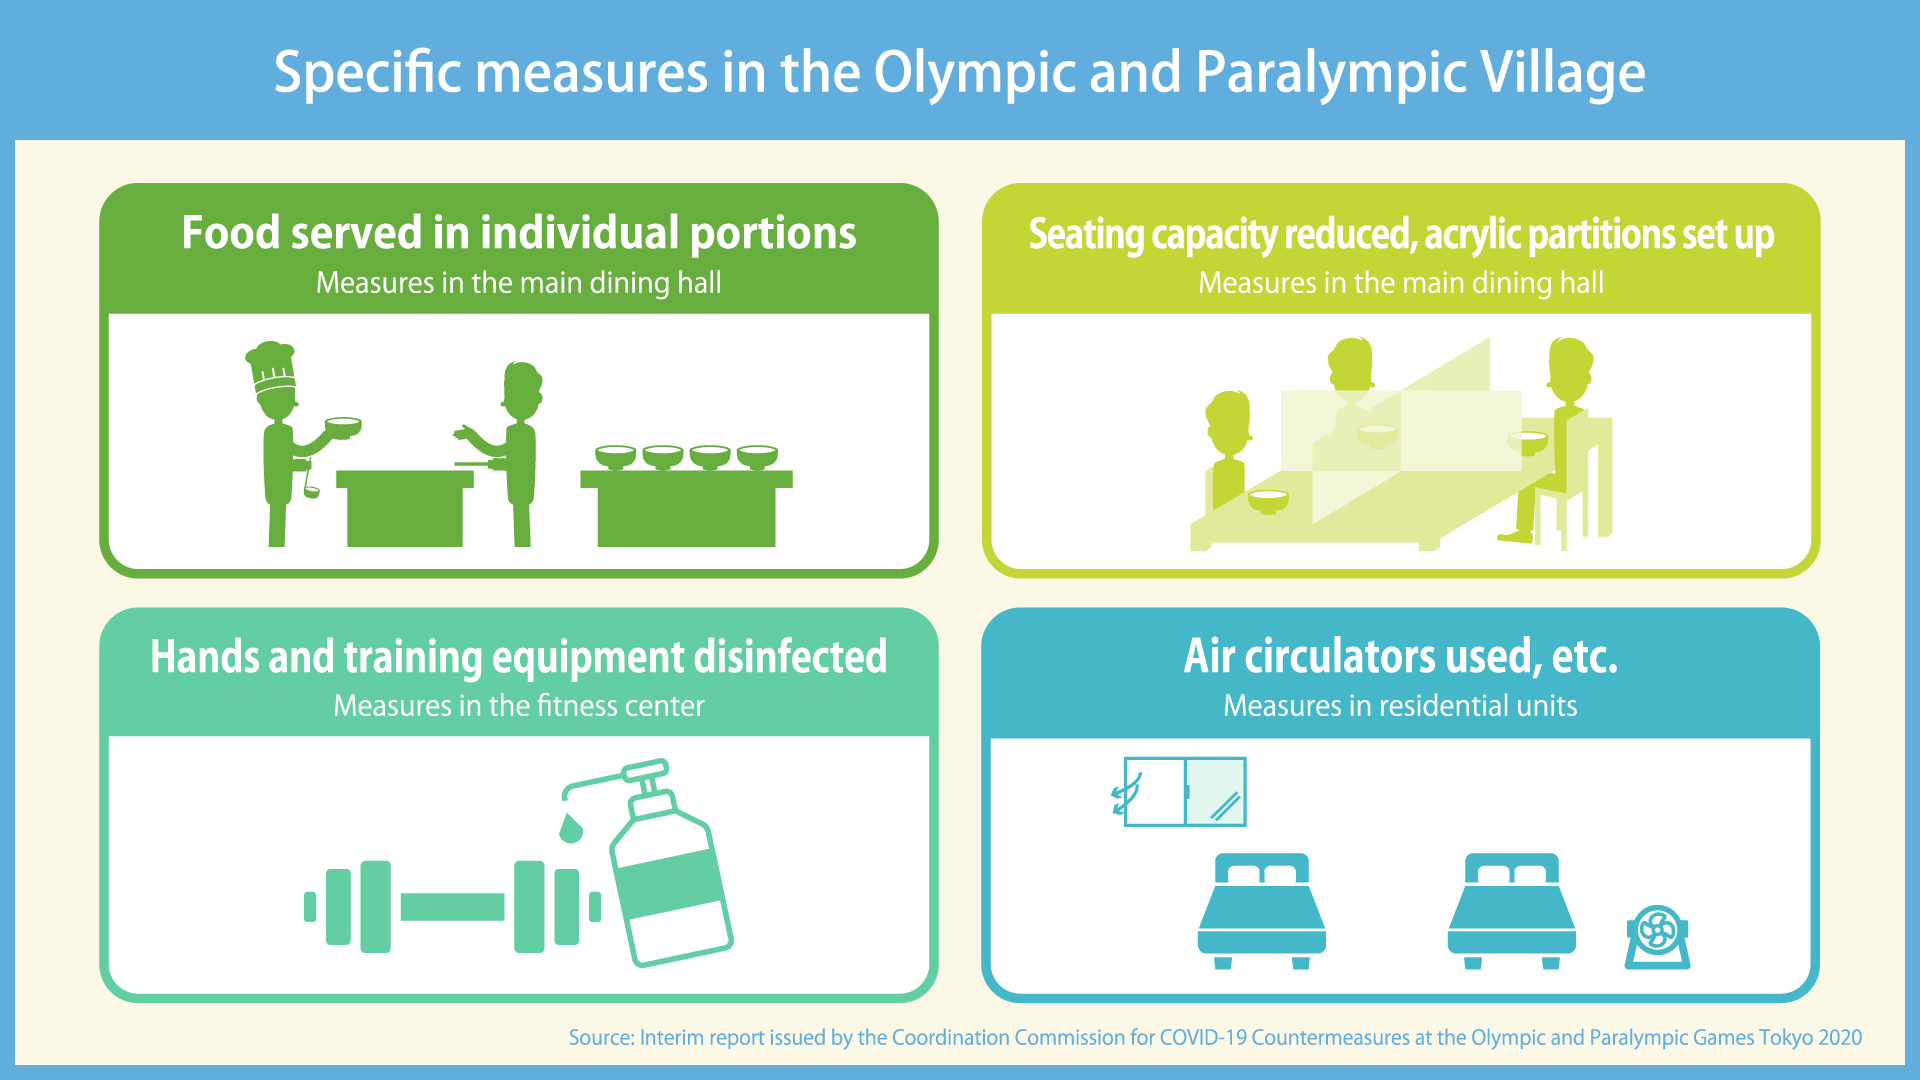 Specific measures in the Olympic and Paralympic Village